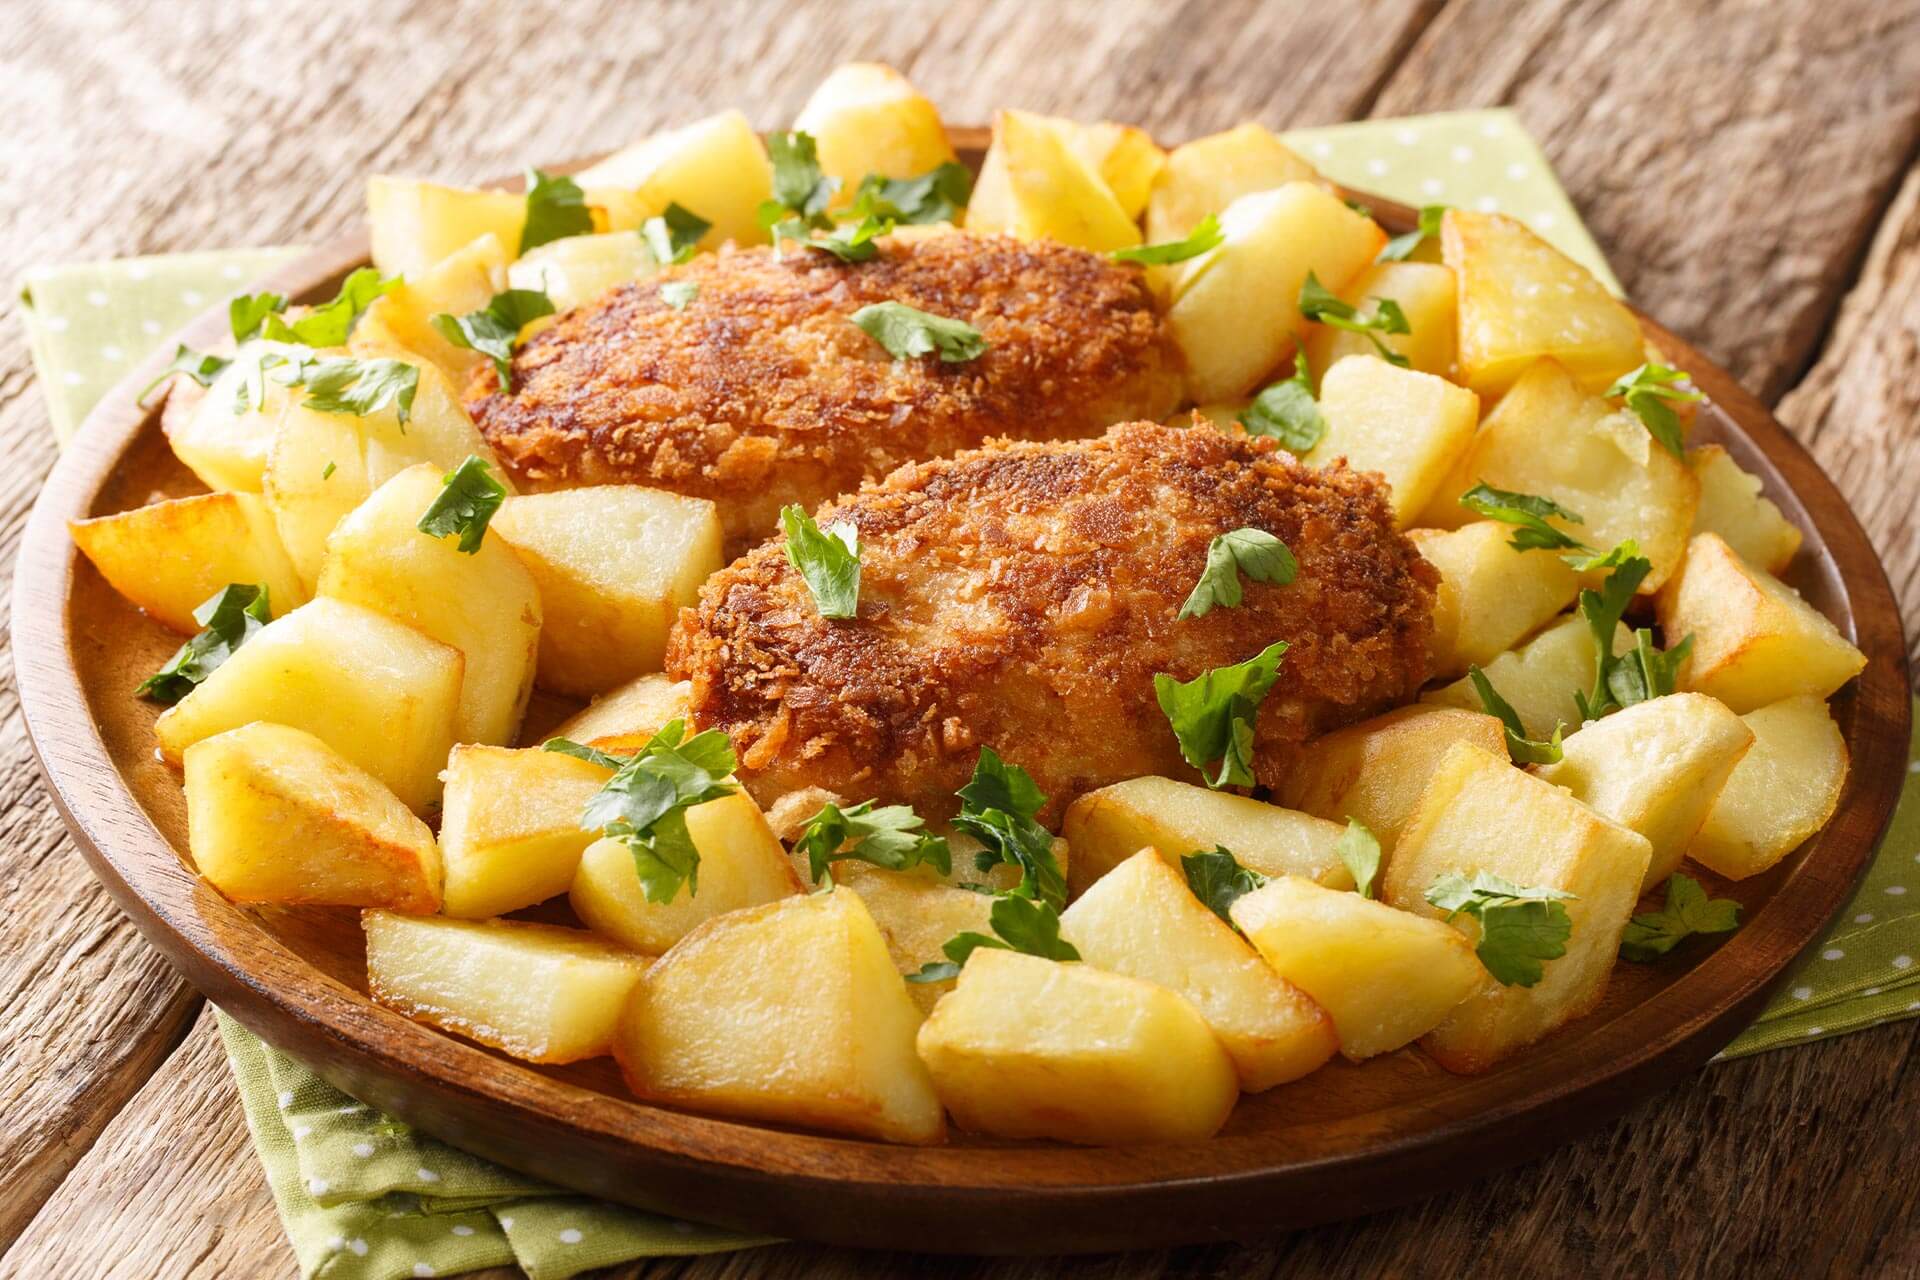 A traditional dish of baked potatoes and two chicken cutlets seasoned with greens